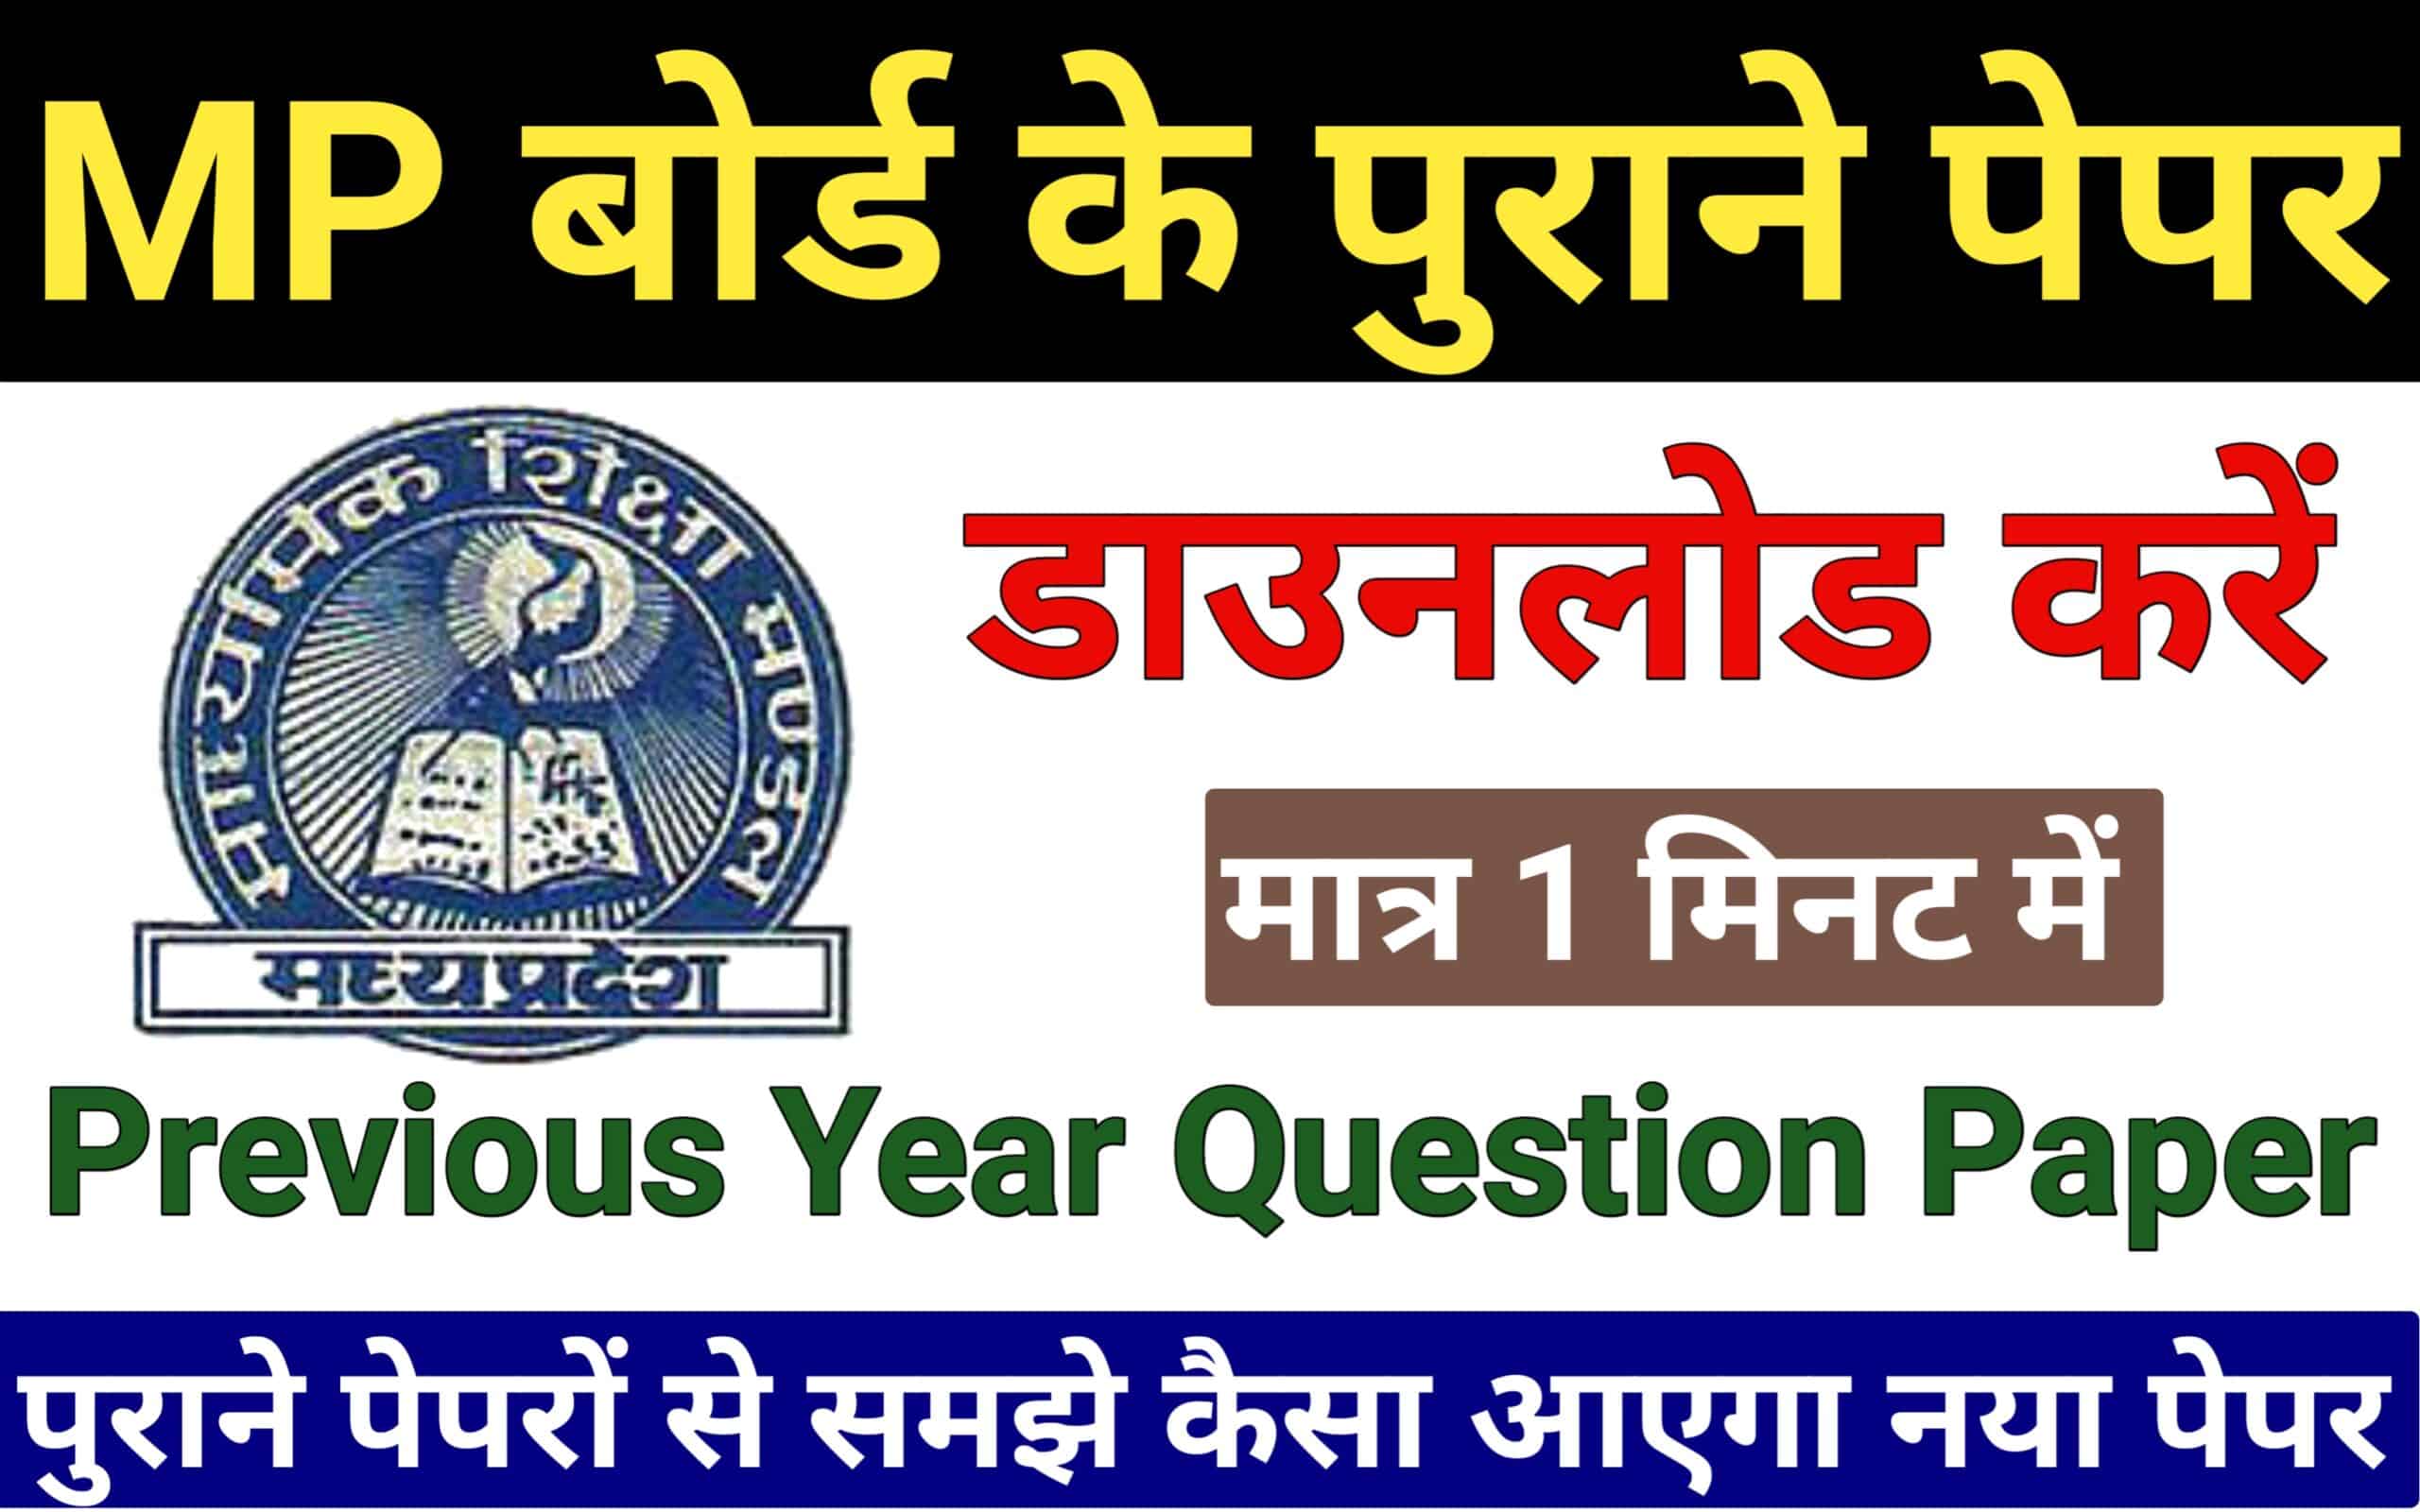 MP Board Previous Year Question Paper Download Kaise Karen